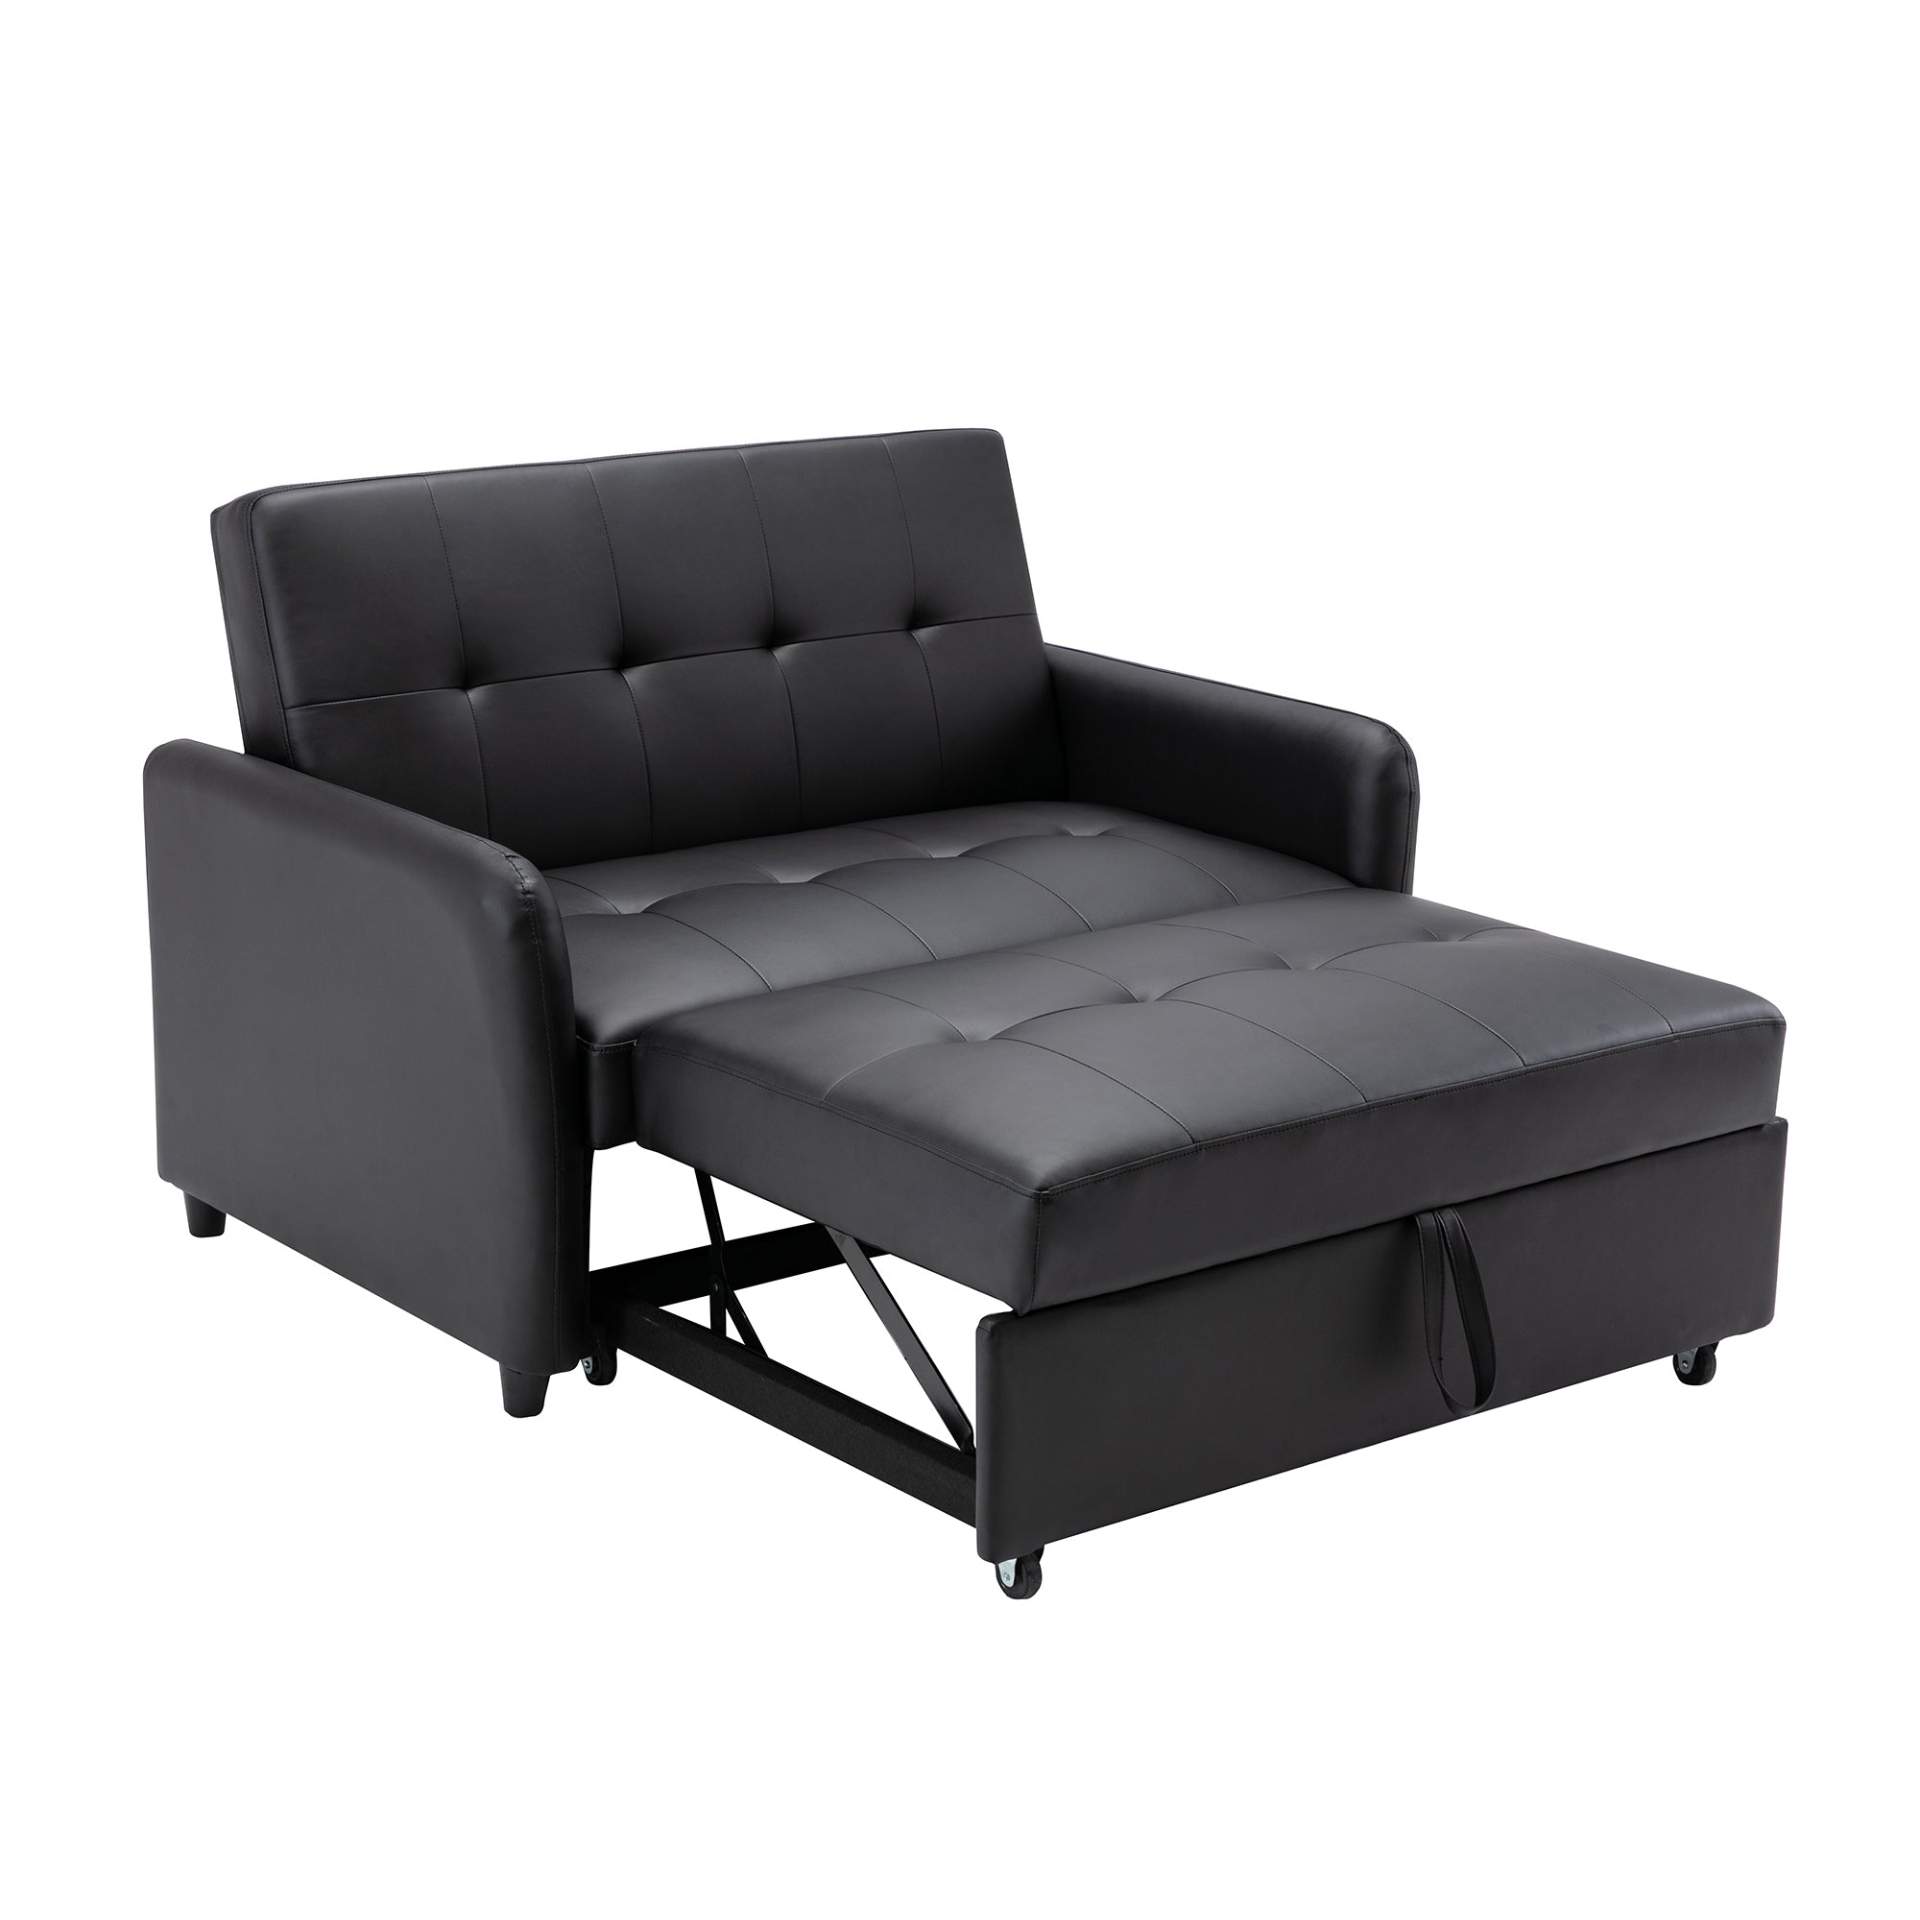 Black - Smart Rest Convertible Armchair Sofa Bed With Dual USB Ports (51.5")